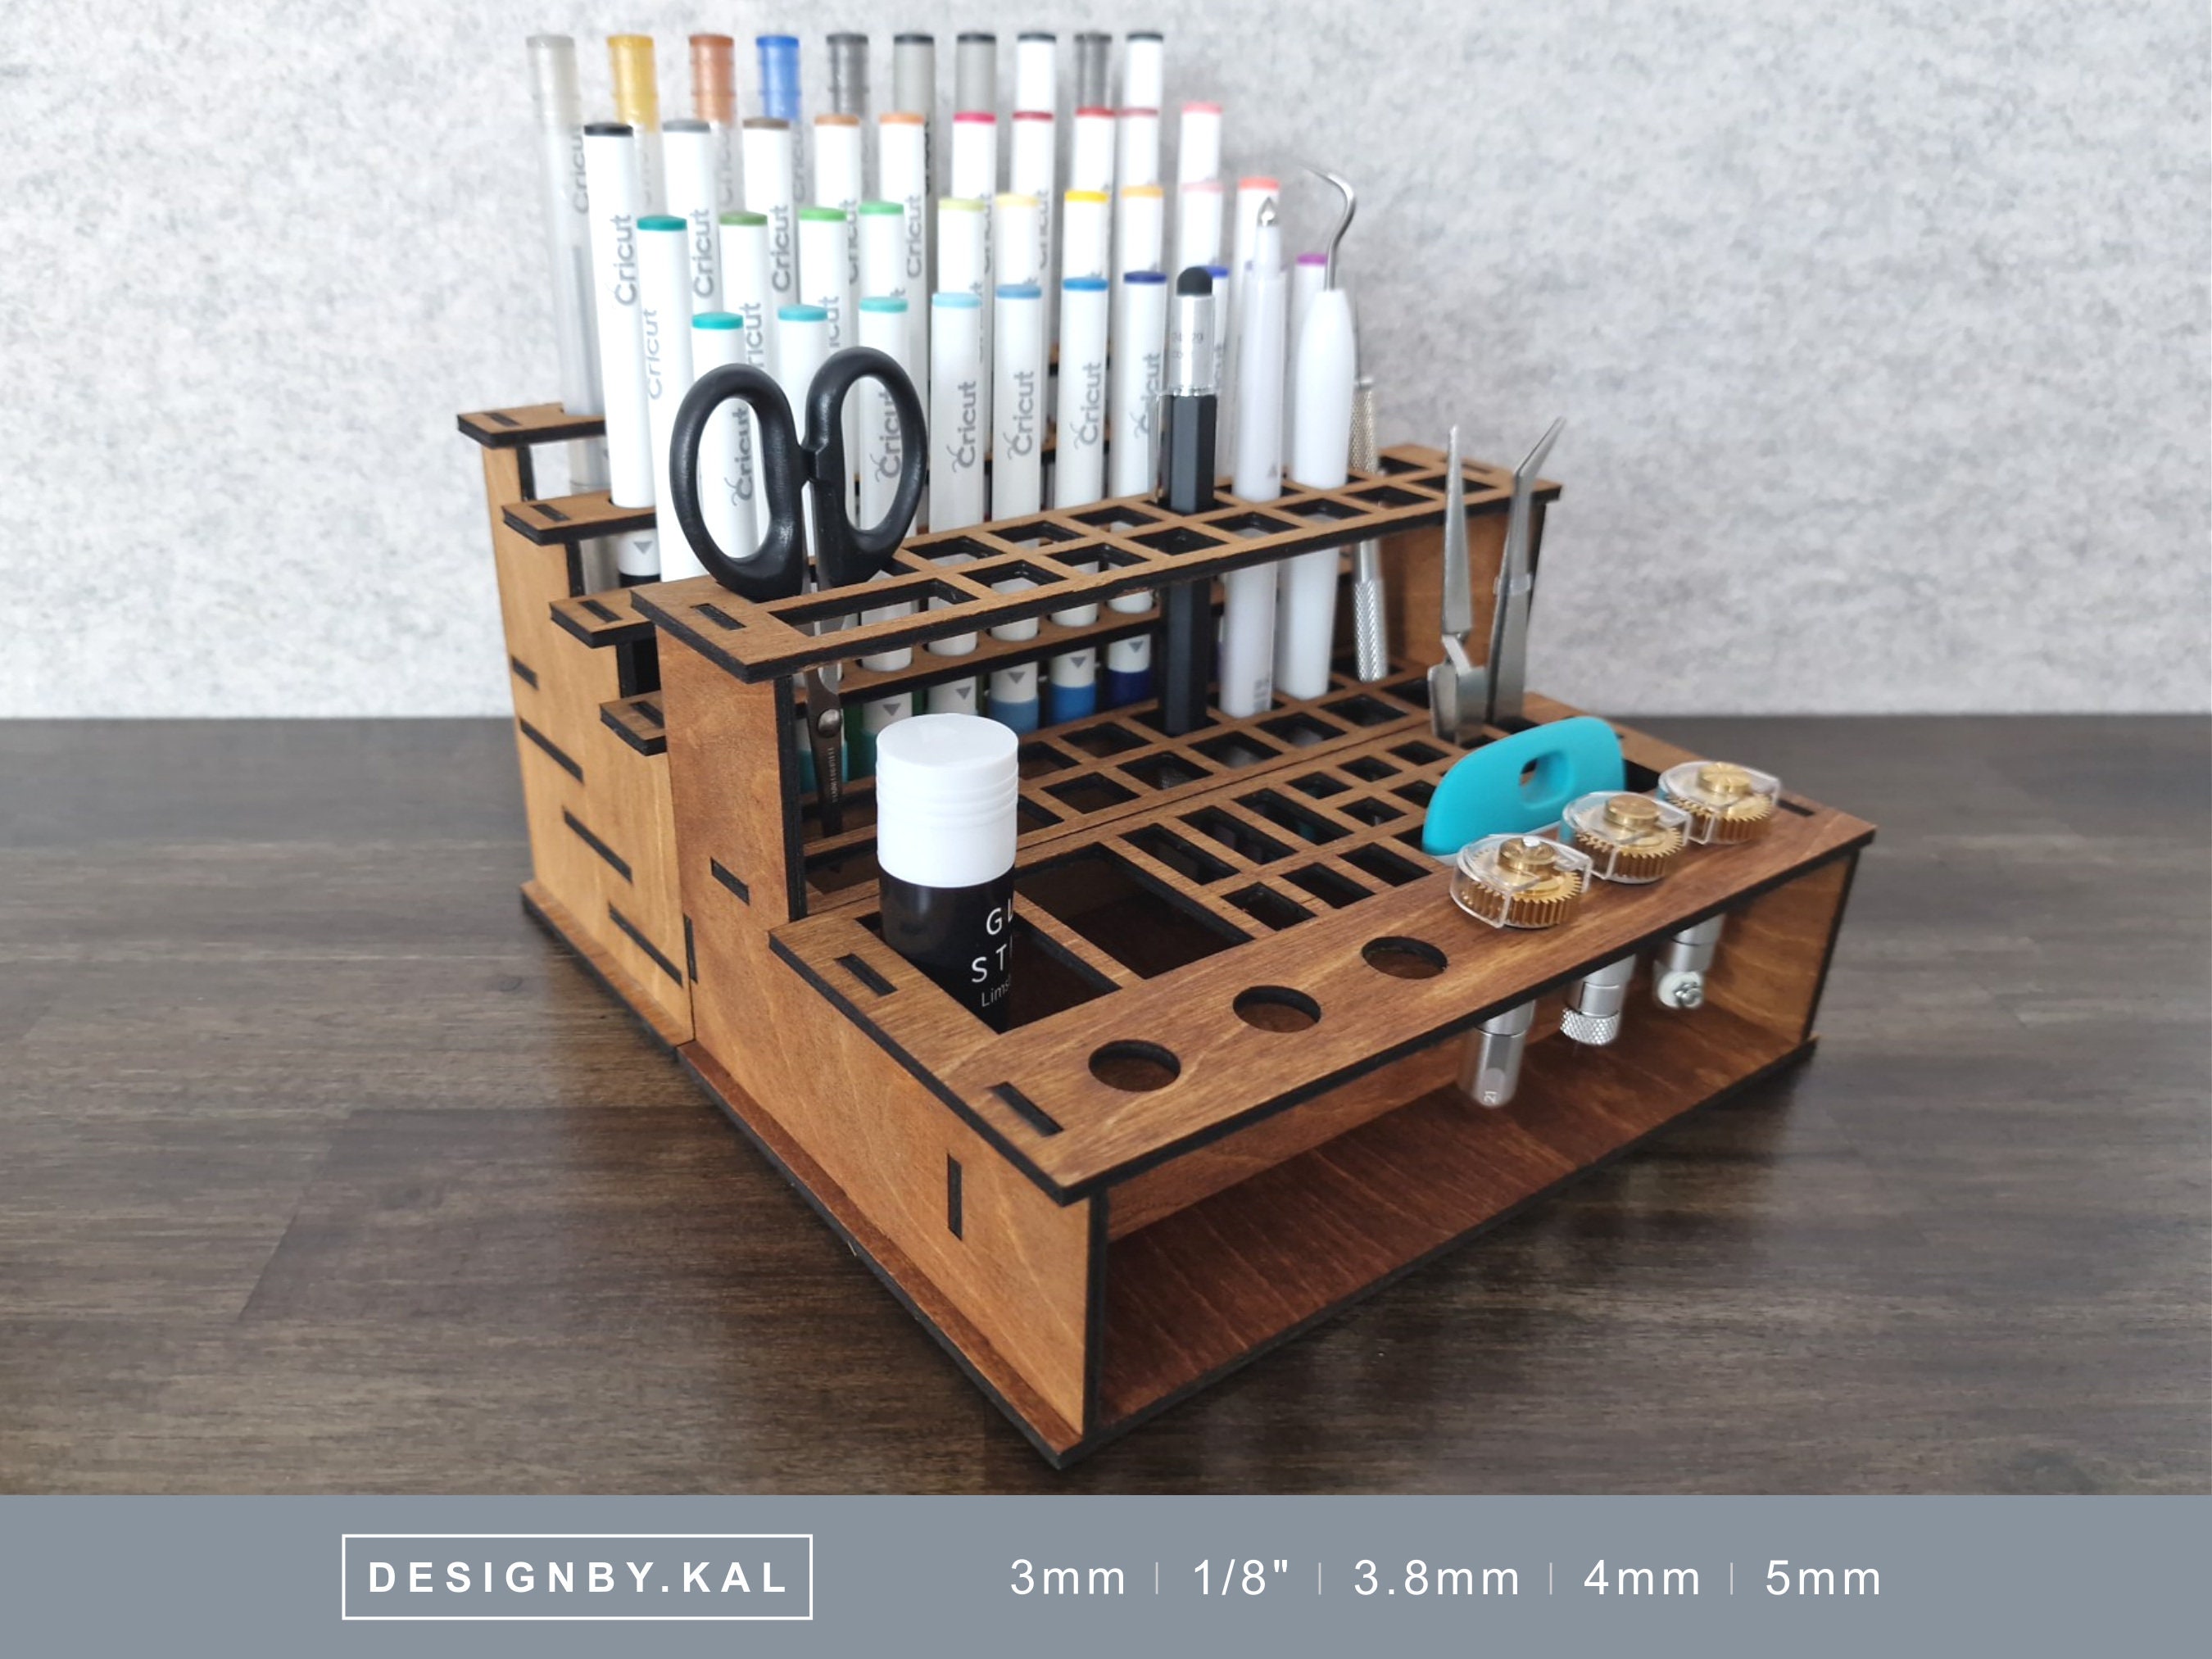 Personalized Craft Tool and Organizer - Tool Caddy - Cricut Tool